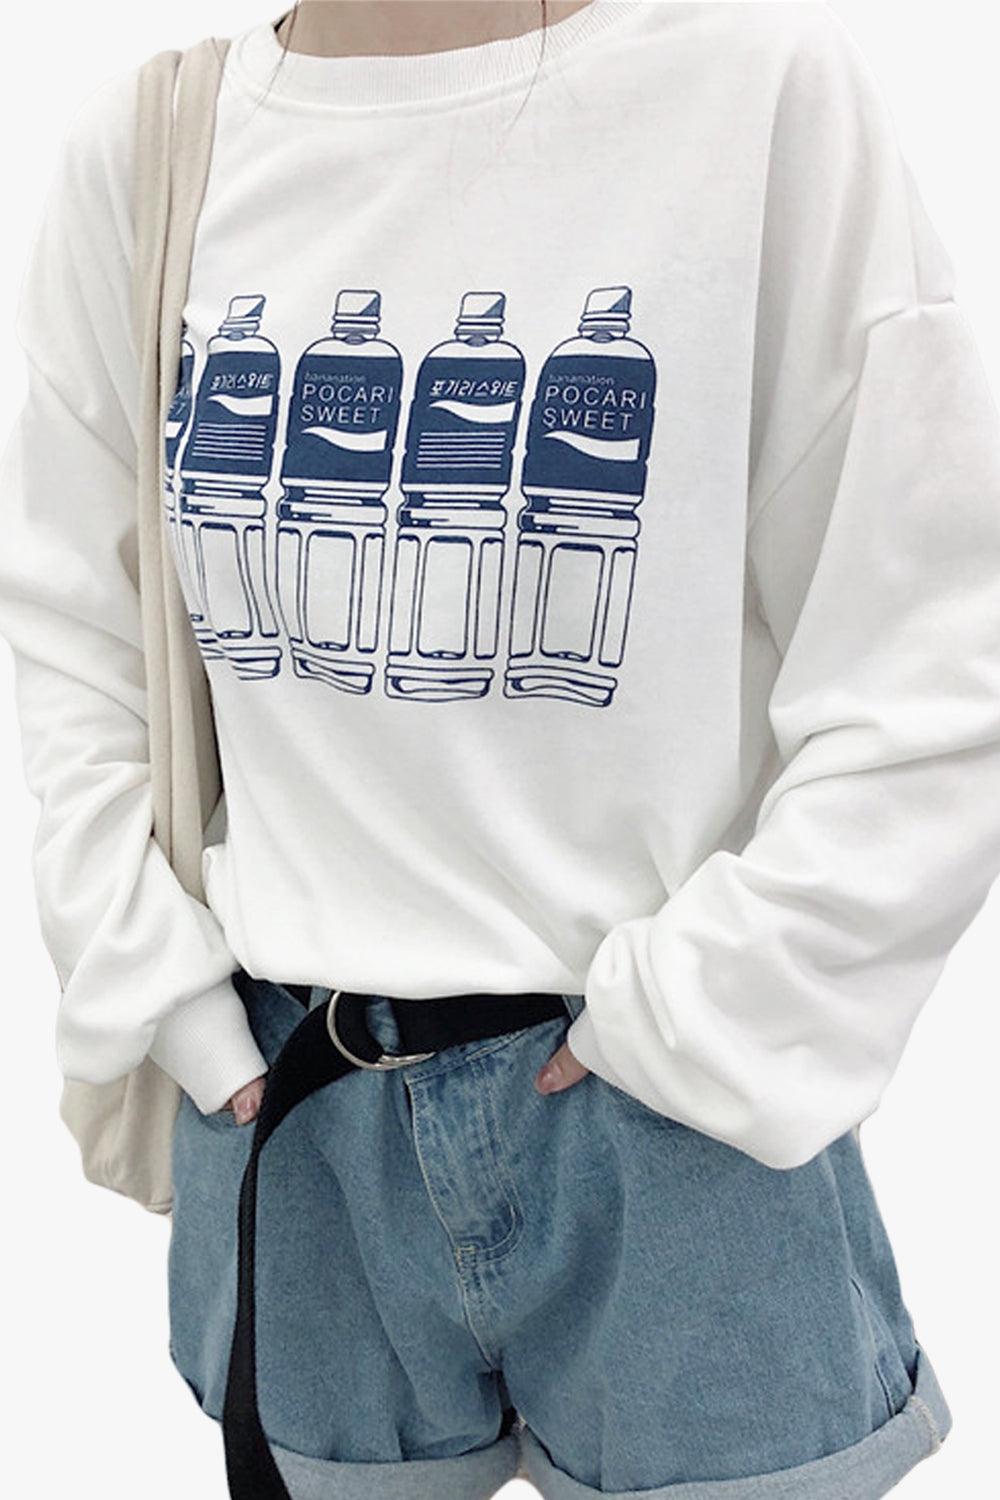 Aesthetic Water Long Sleeve Shirt - Aesthetic Clothes Shop